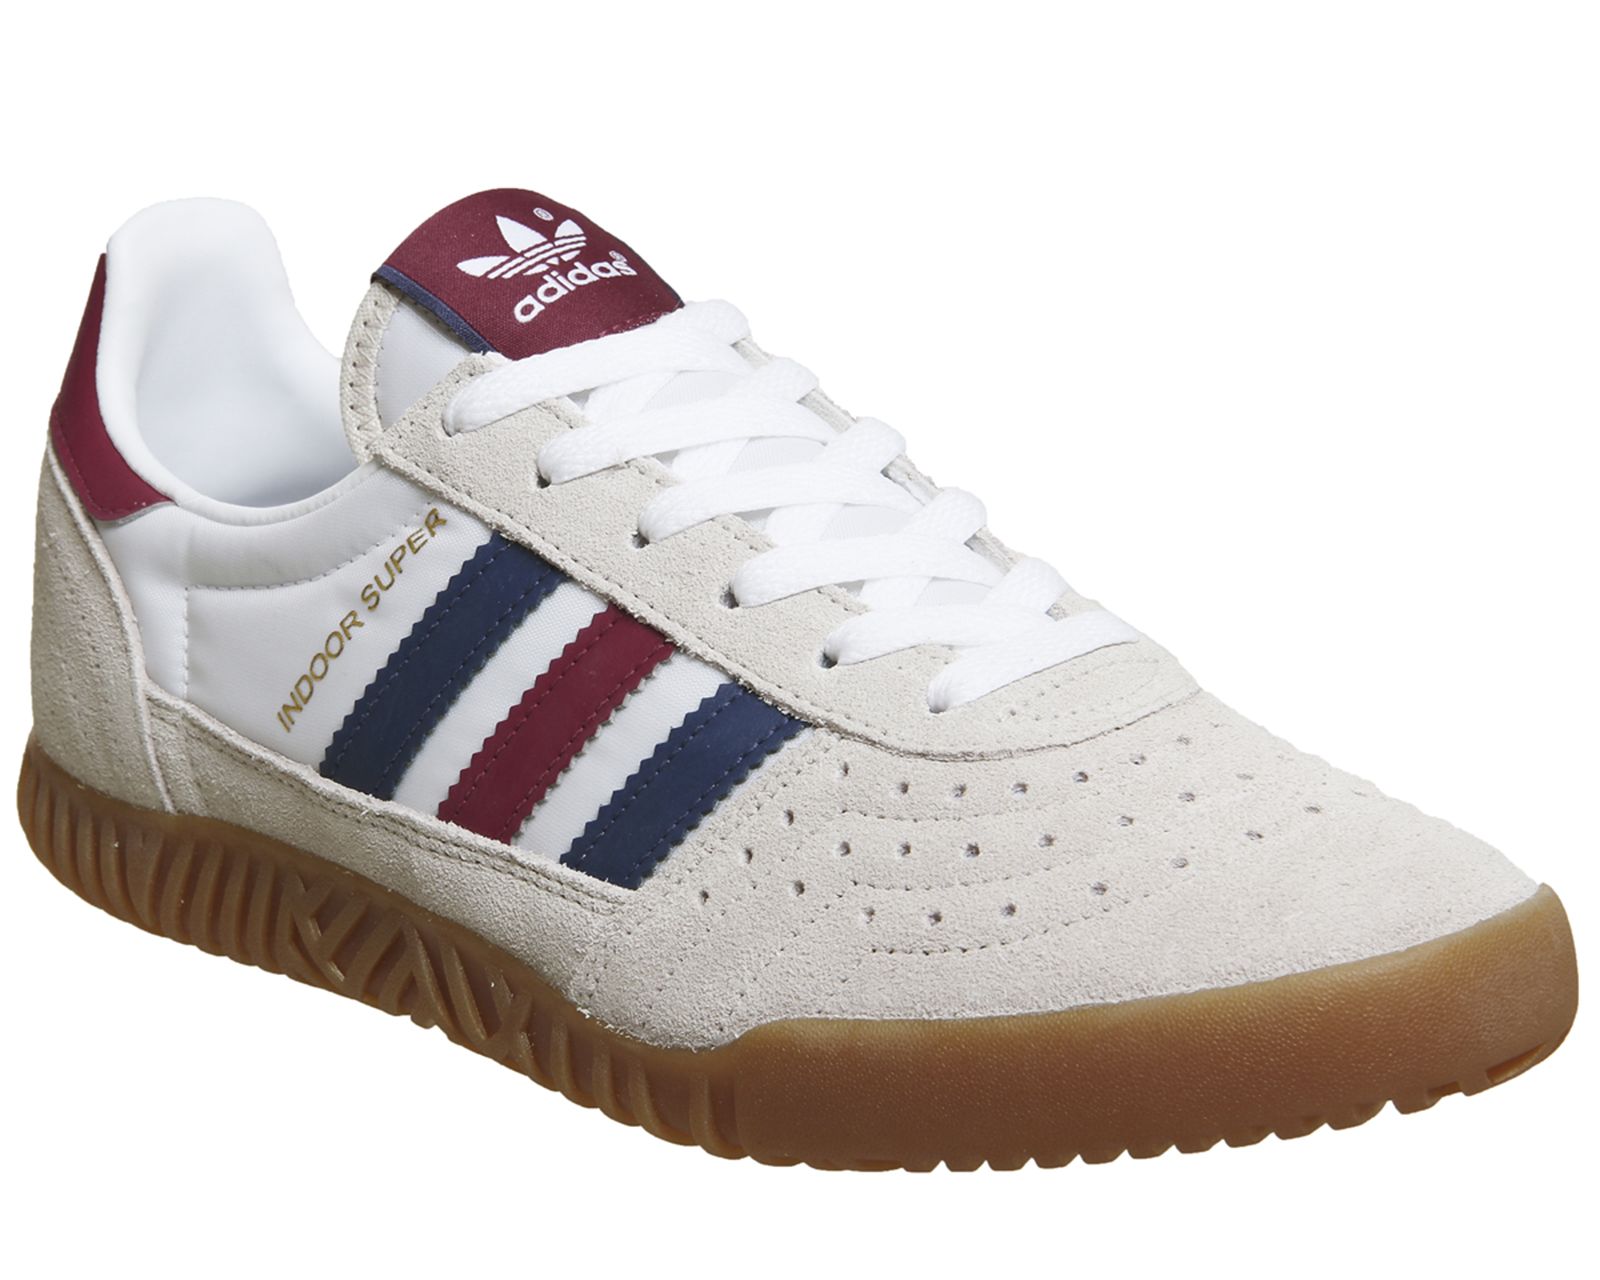 adidas Indoor Super Trainers Clear Brown - His trainers